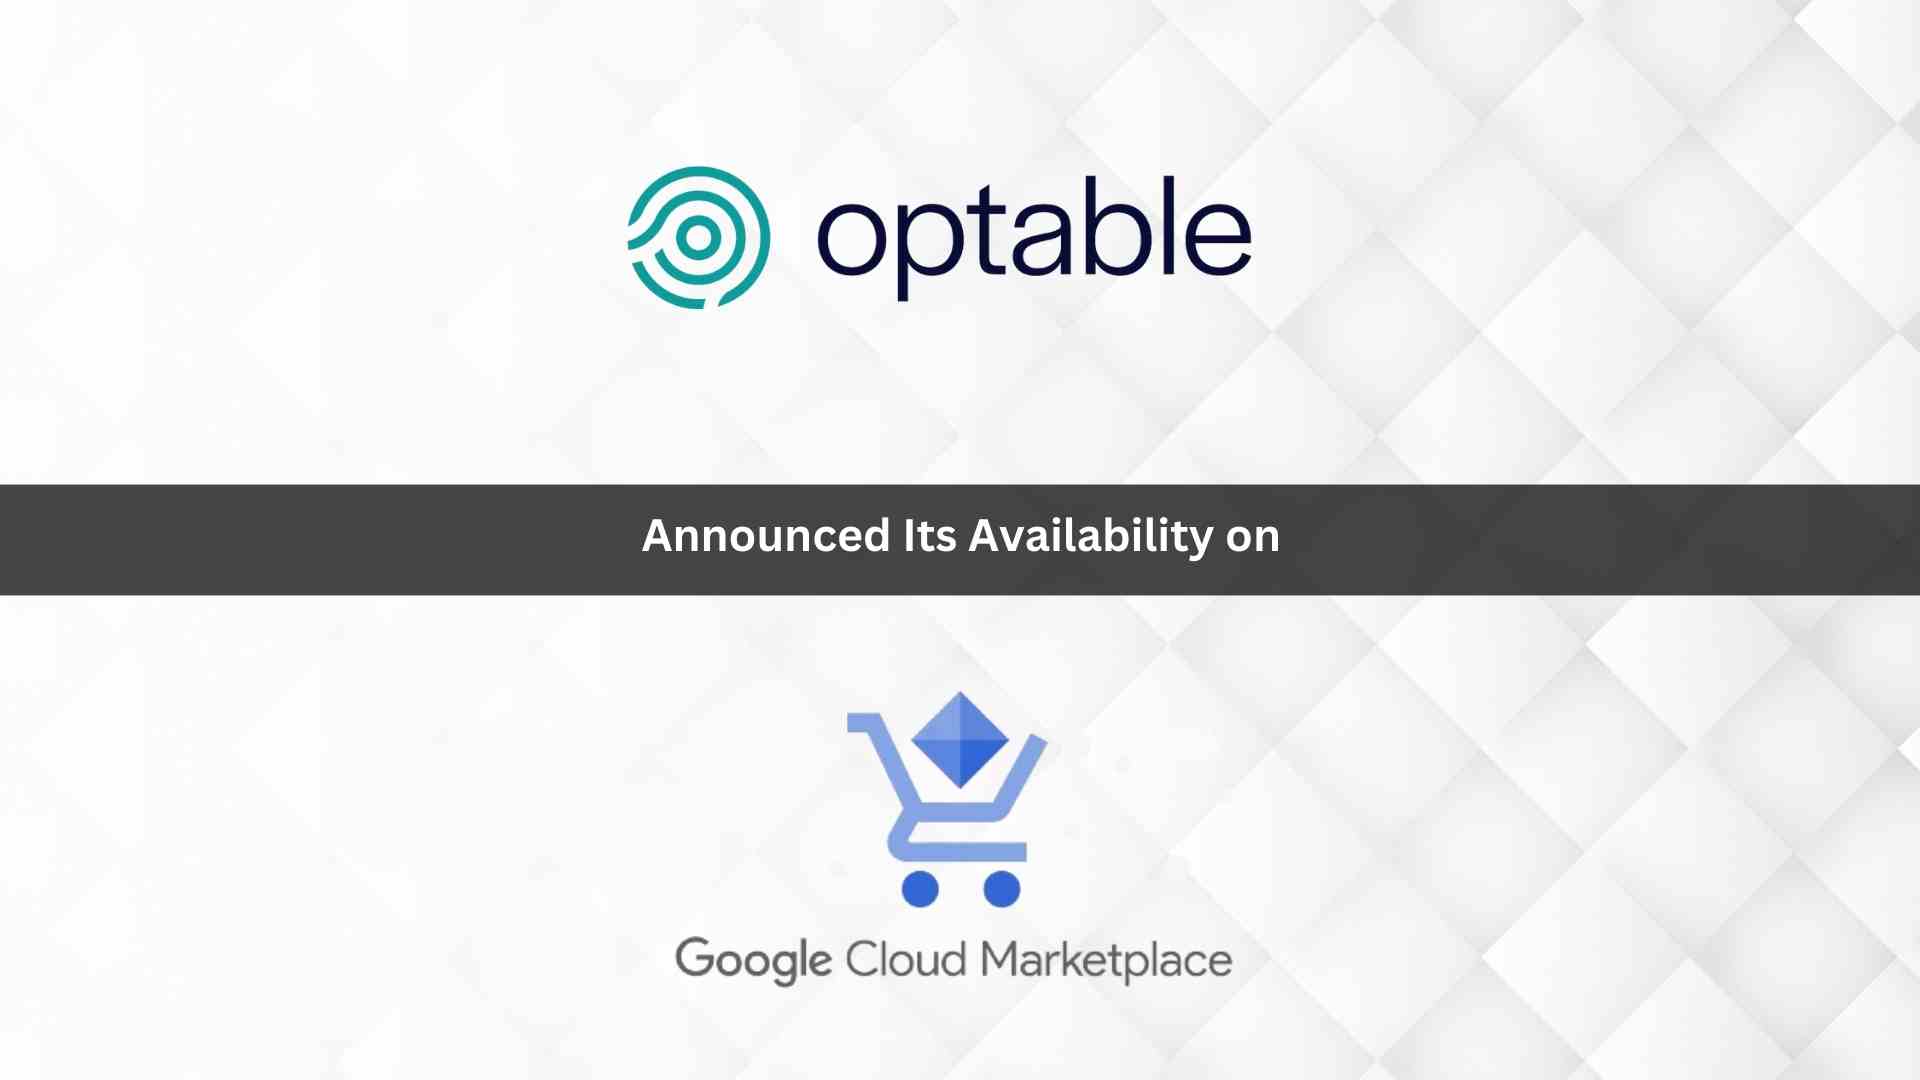 Optable Delivers Privacy-First Advertising Solutions on Google Cloud Marketplace